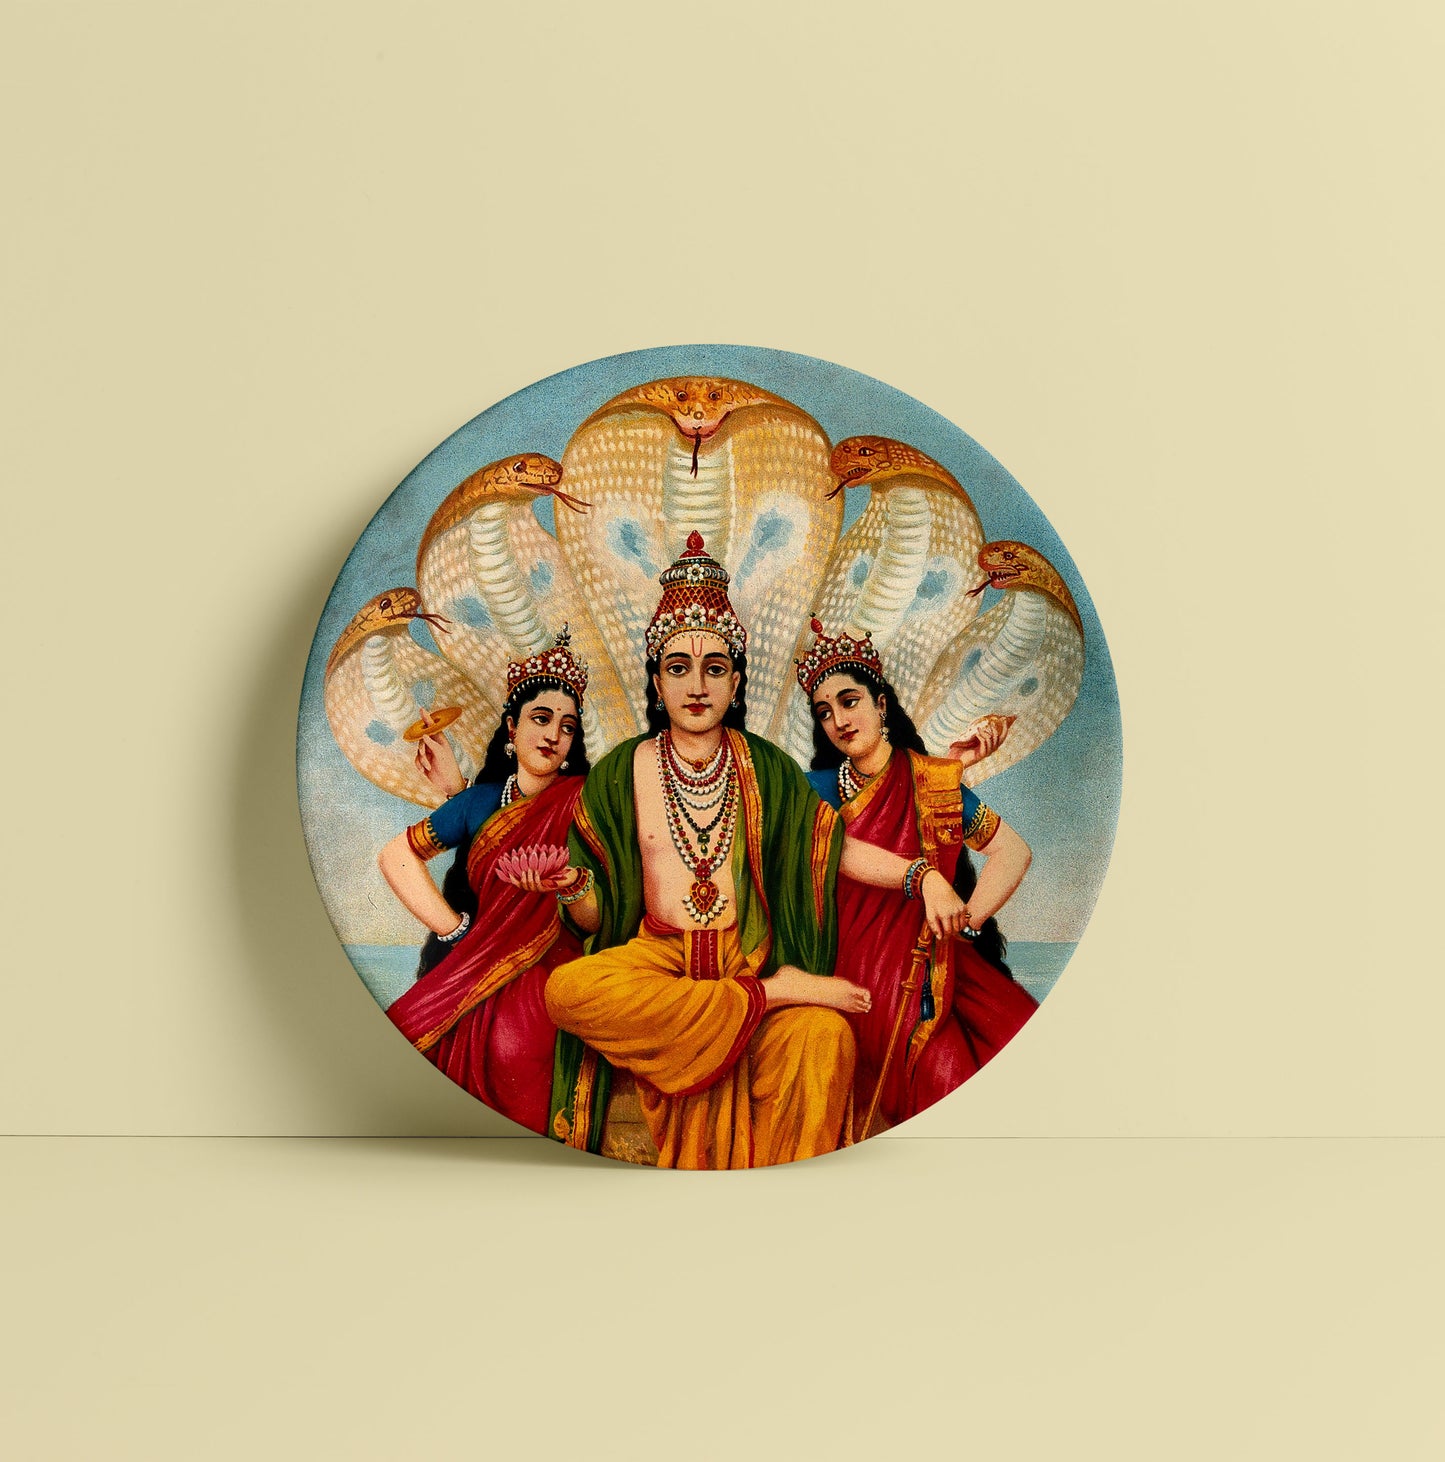 Vishnu flanked by two wives resting on Shesa by Ravi Varma Ceramic Plate for Home Decor